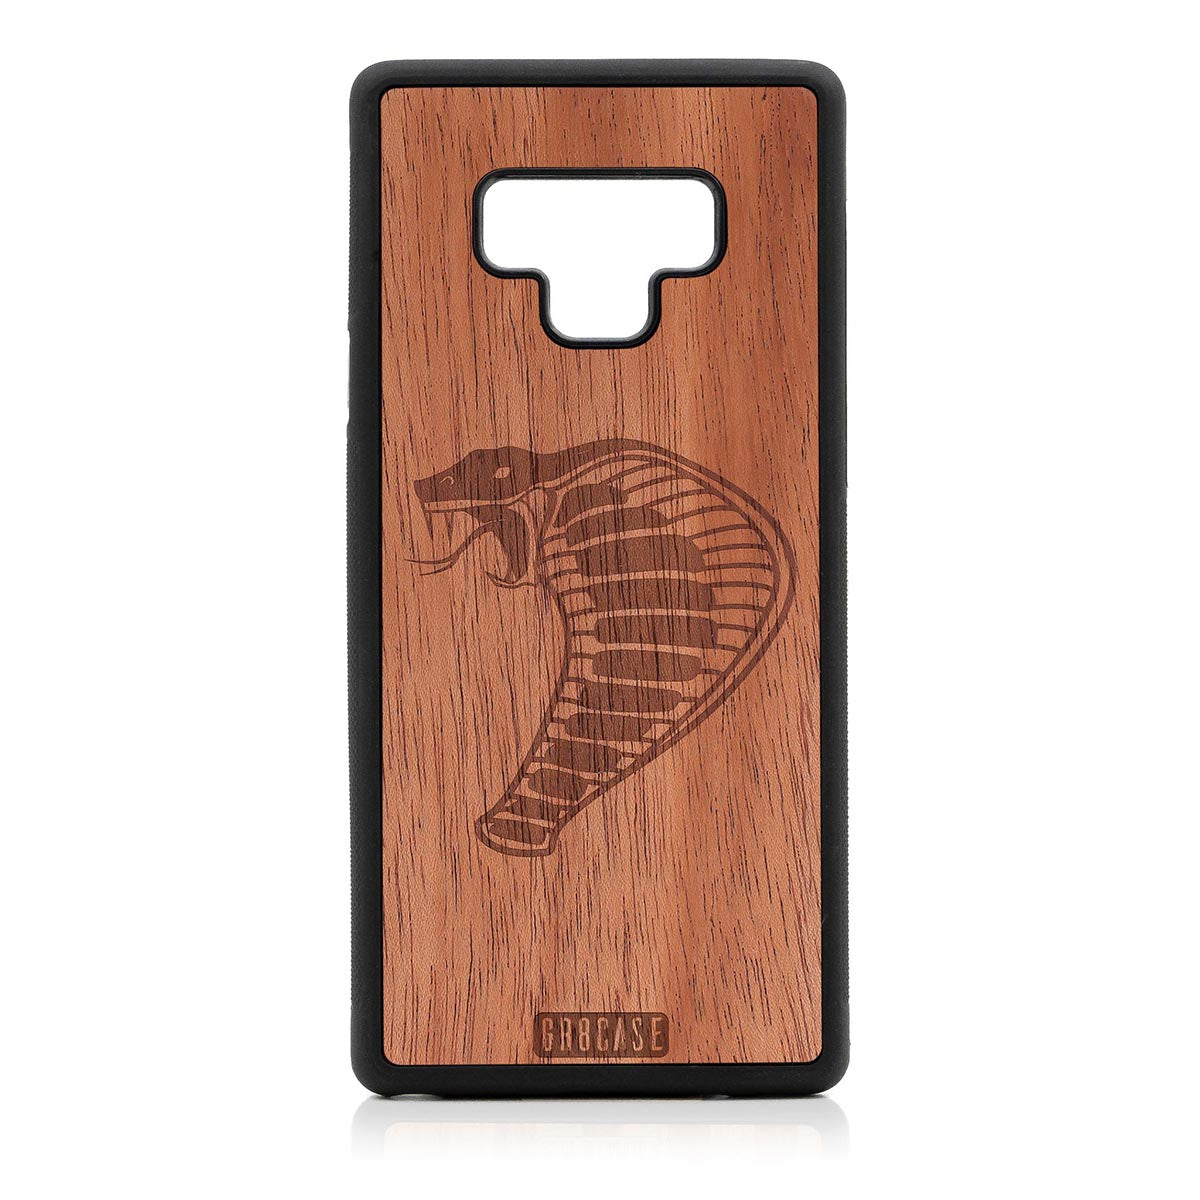 Cobra Design Wood Case For Samsung Galaxy Note 9 by GR8CASE